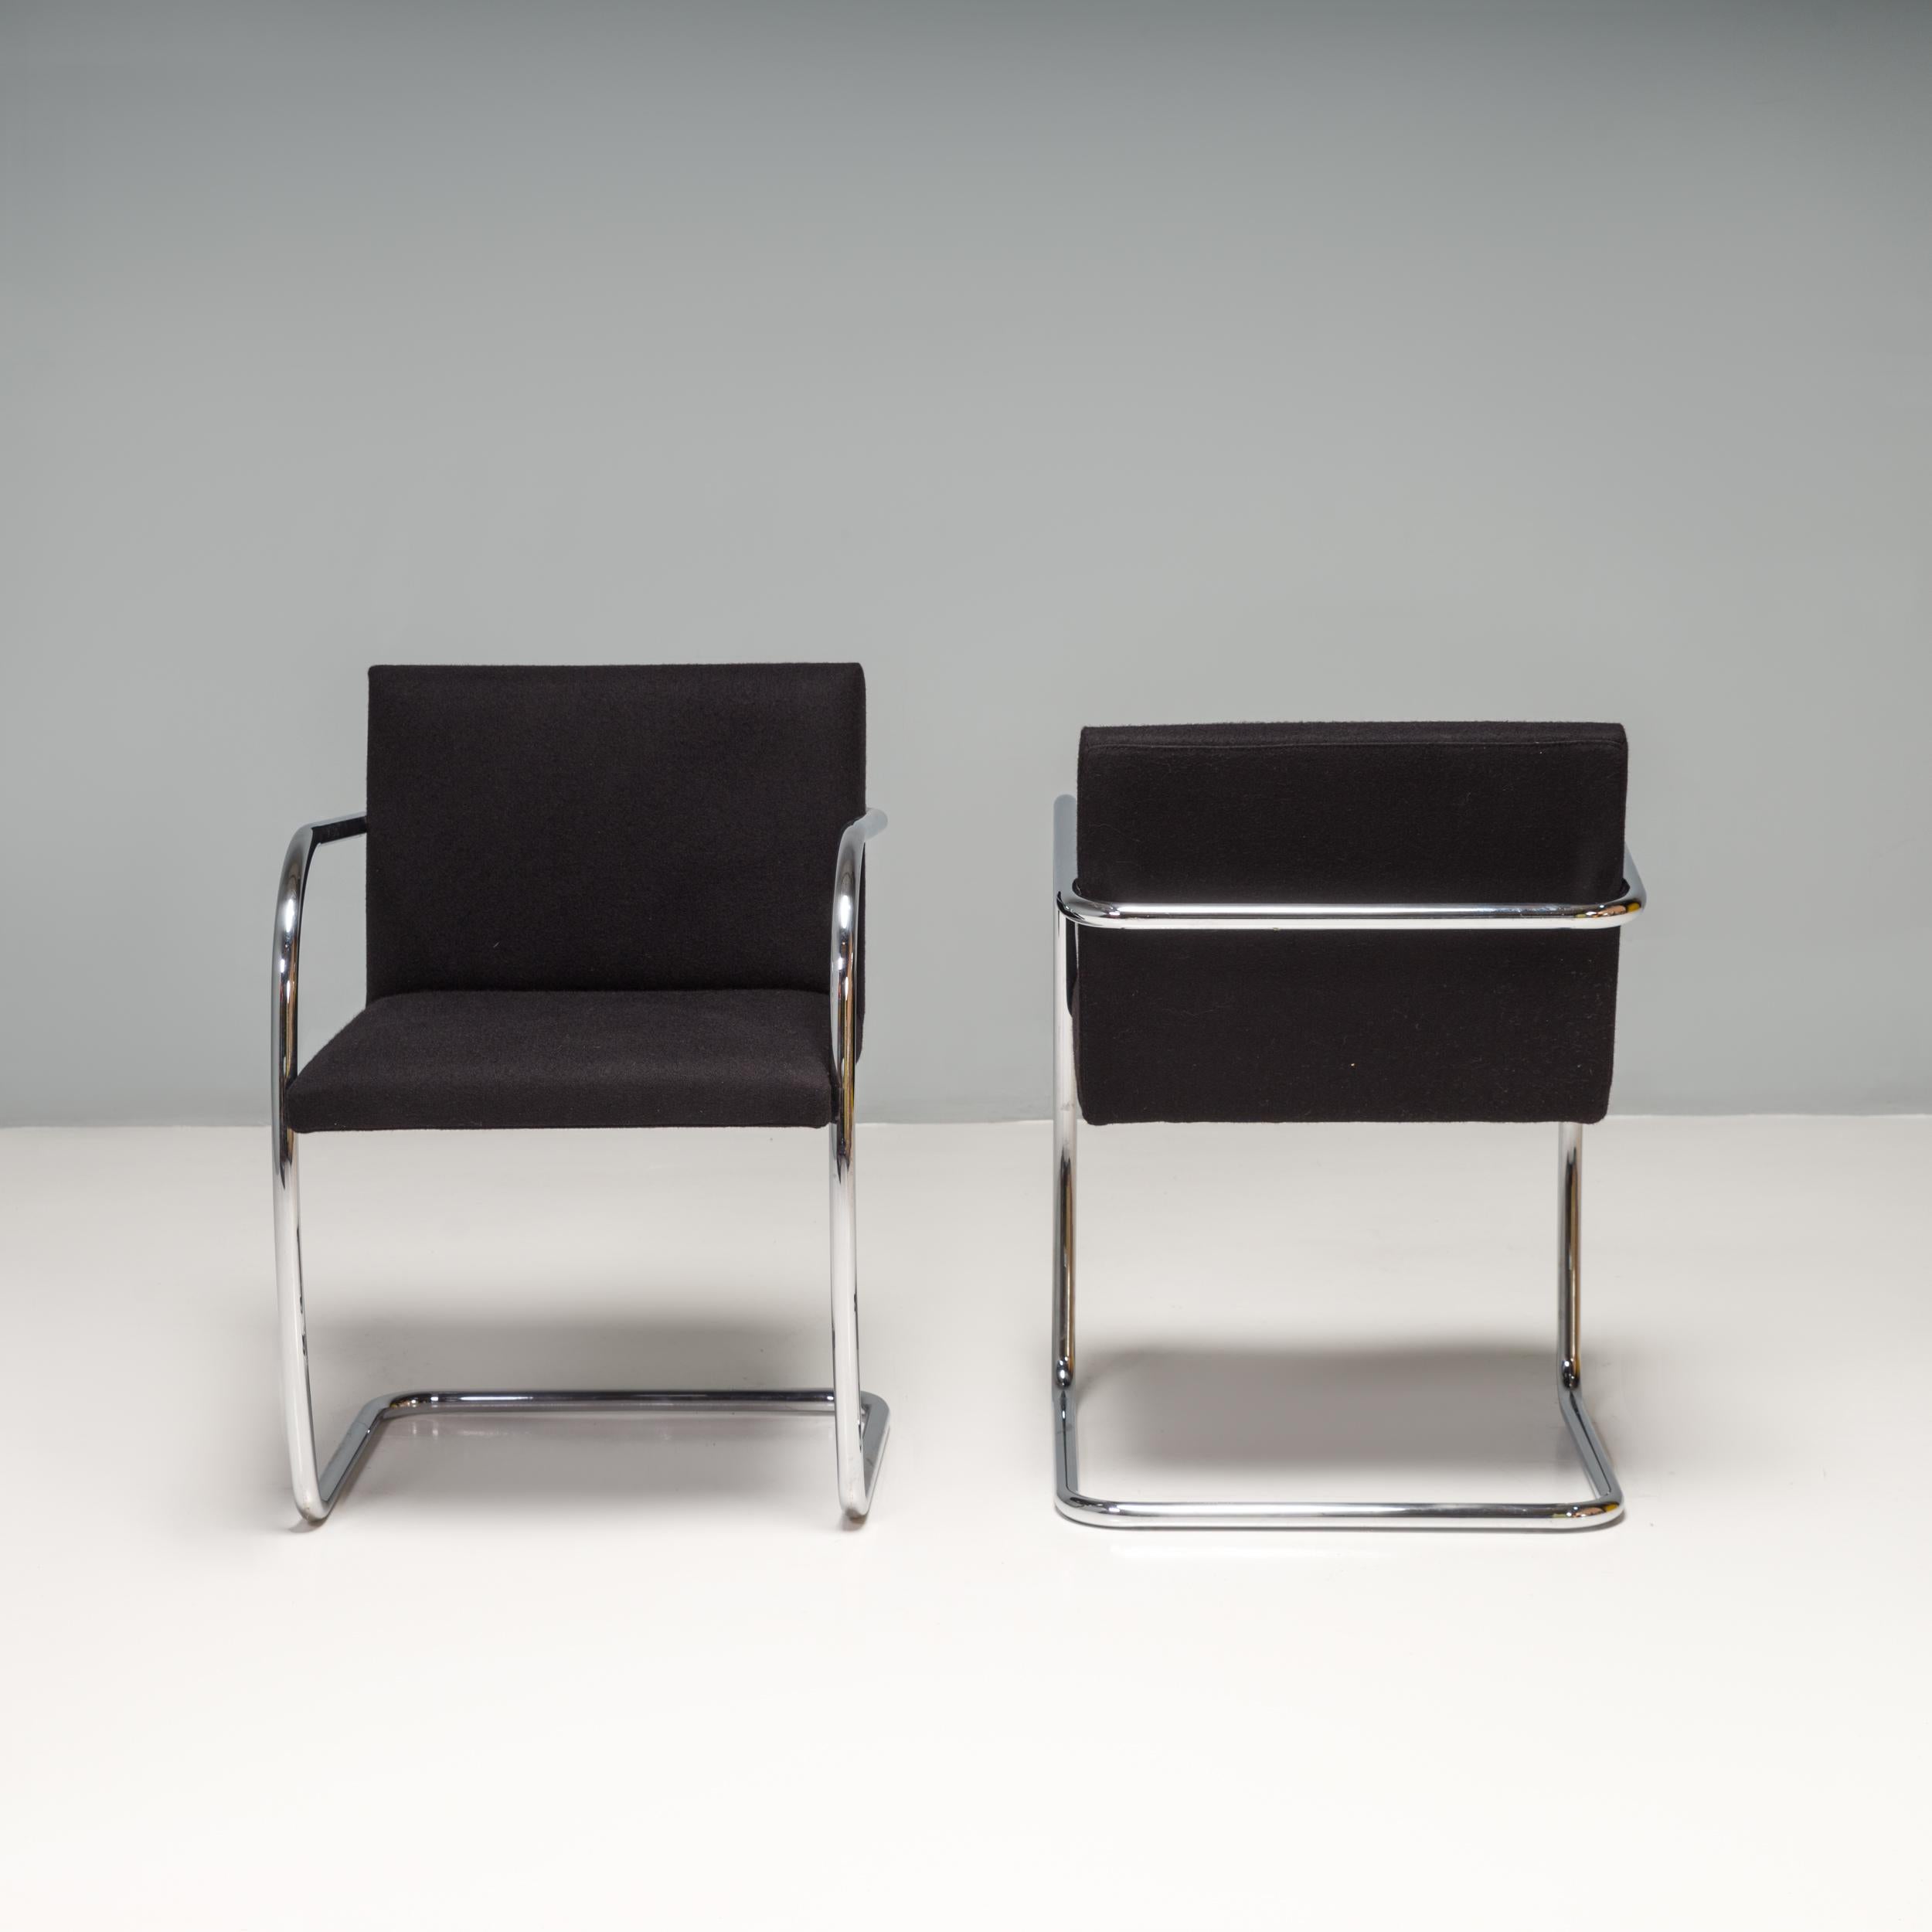 Originally designed by Mies van der Rohe in 1930 for his House in Brno, Czech Republic, the Brno chair remains a design icon. 

Sleek and simple, these cantilever chairs are upholstered in black fabric and feature tubular chrome frames with curved